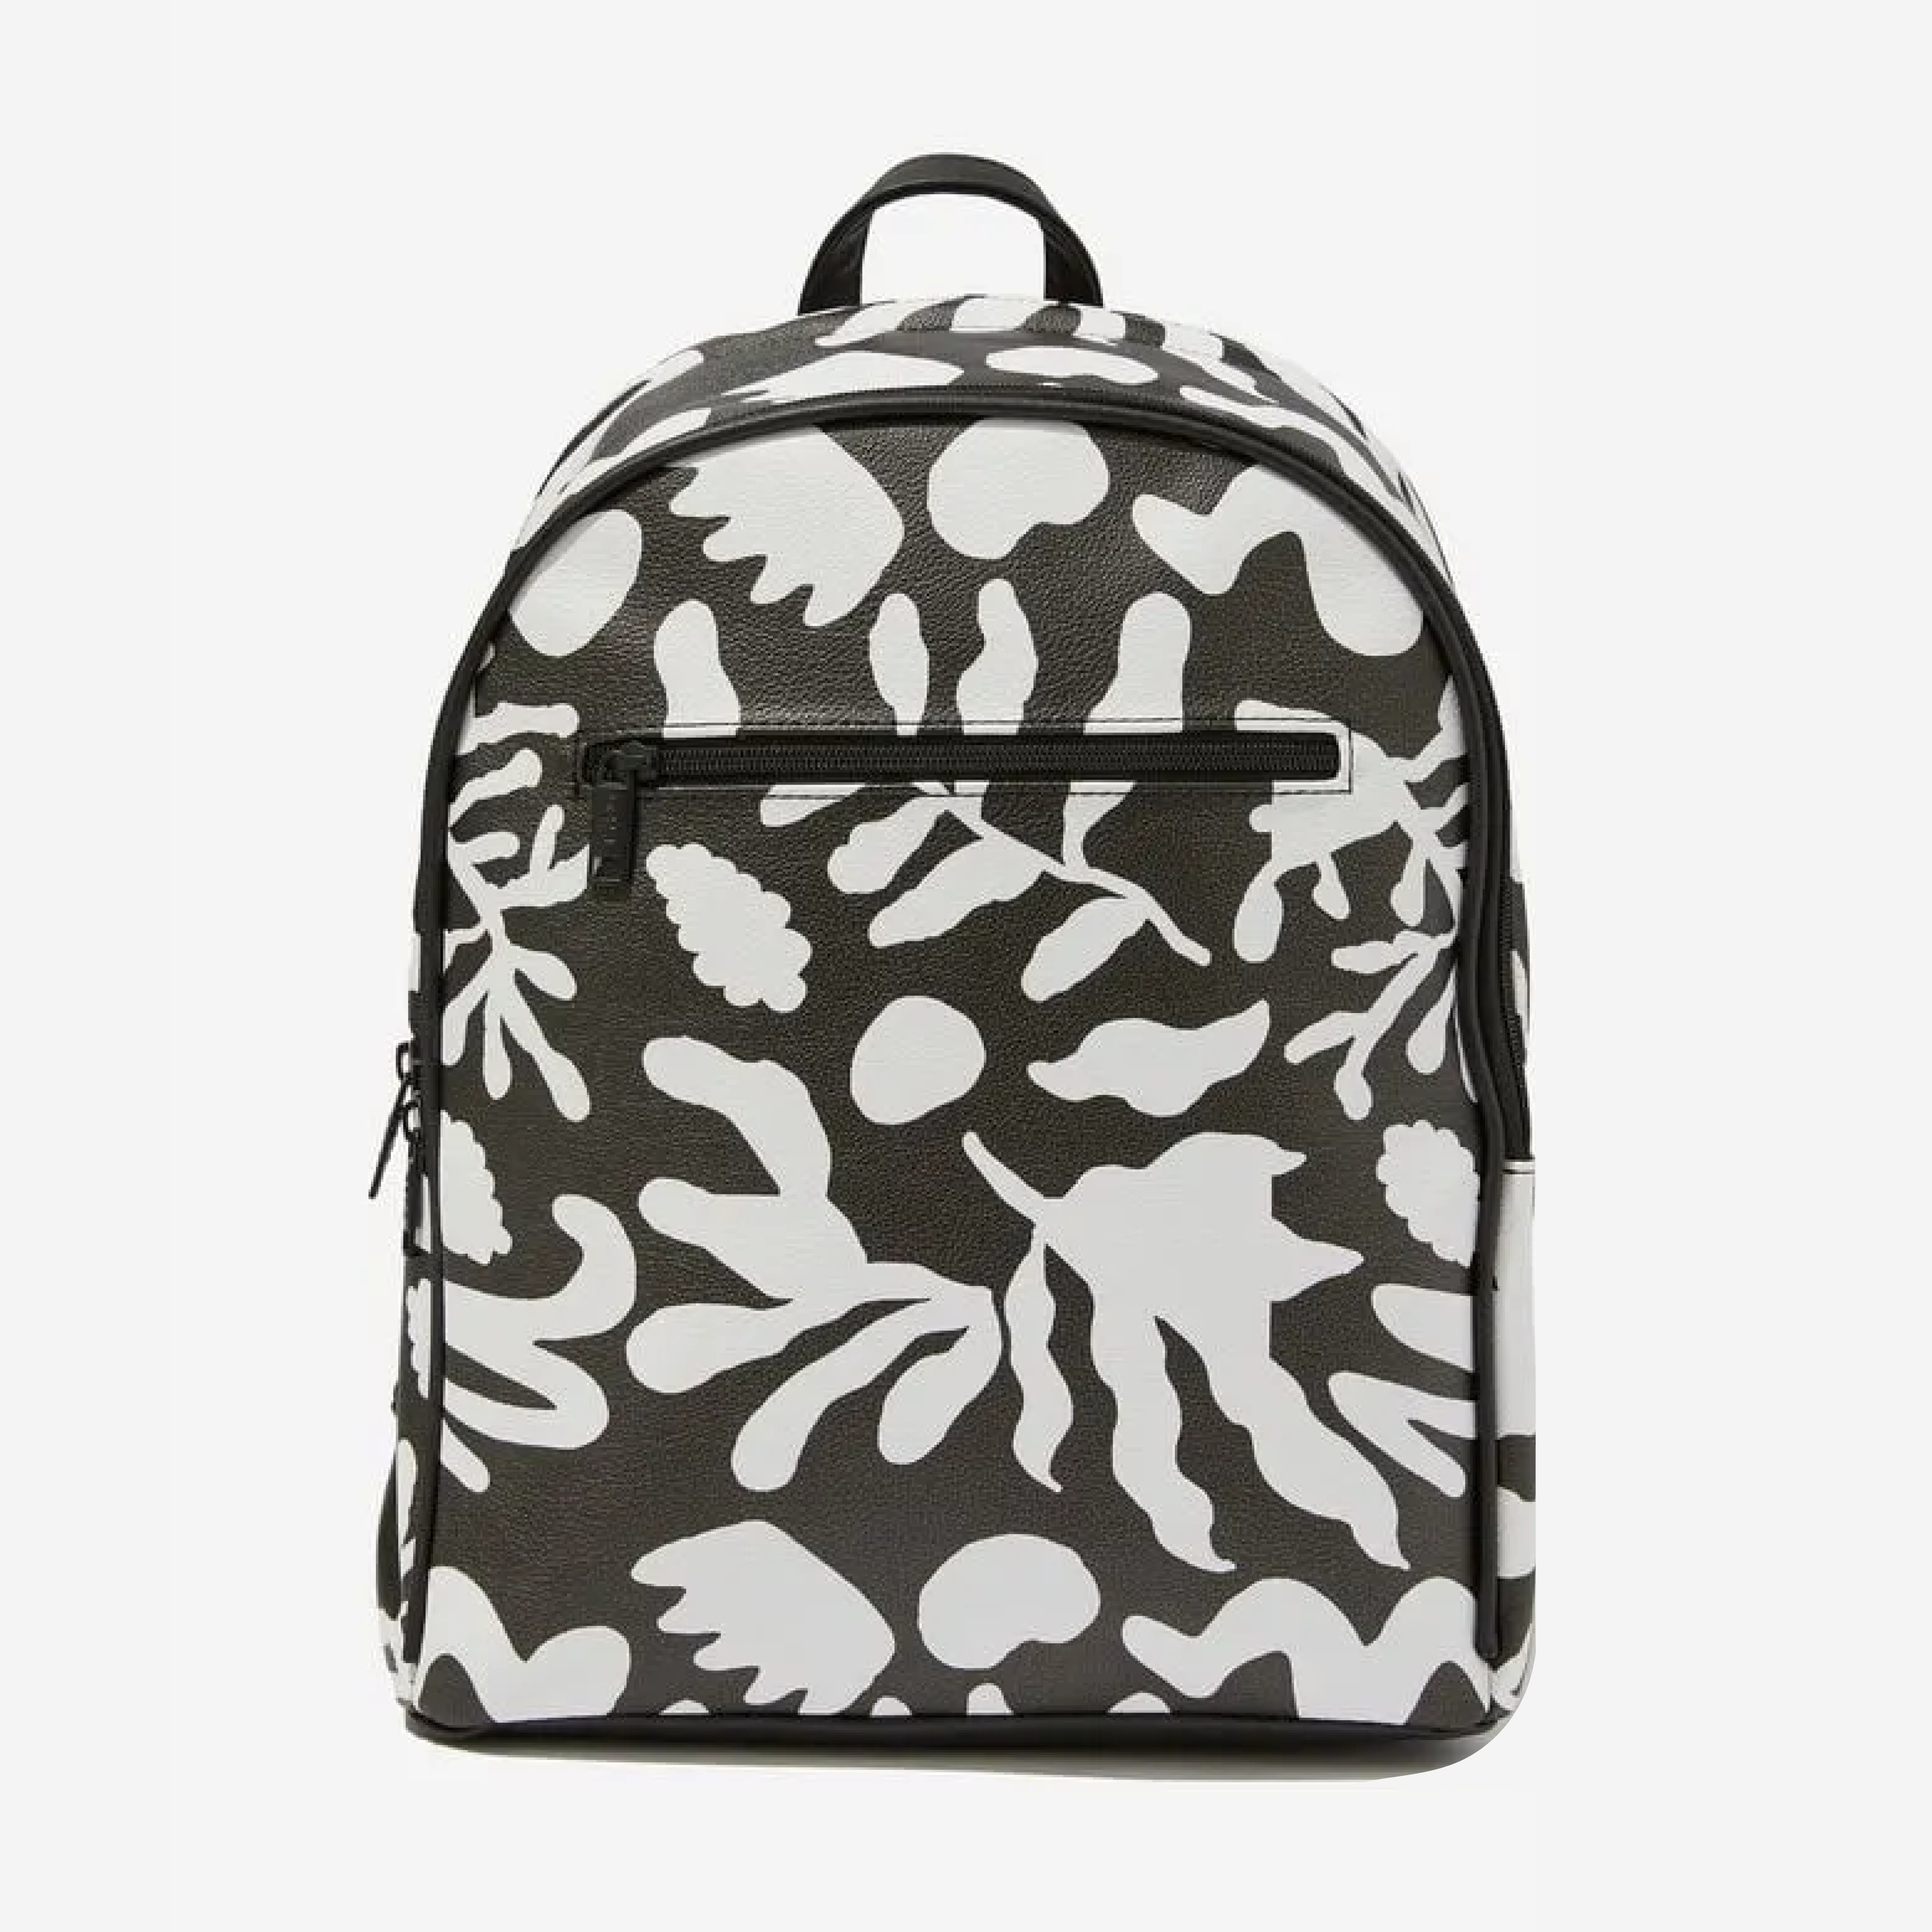 Typo Backpack